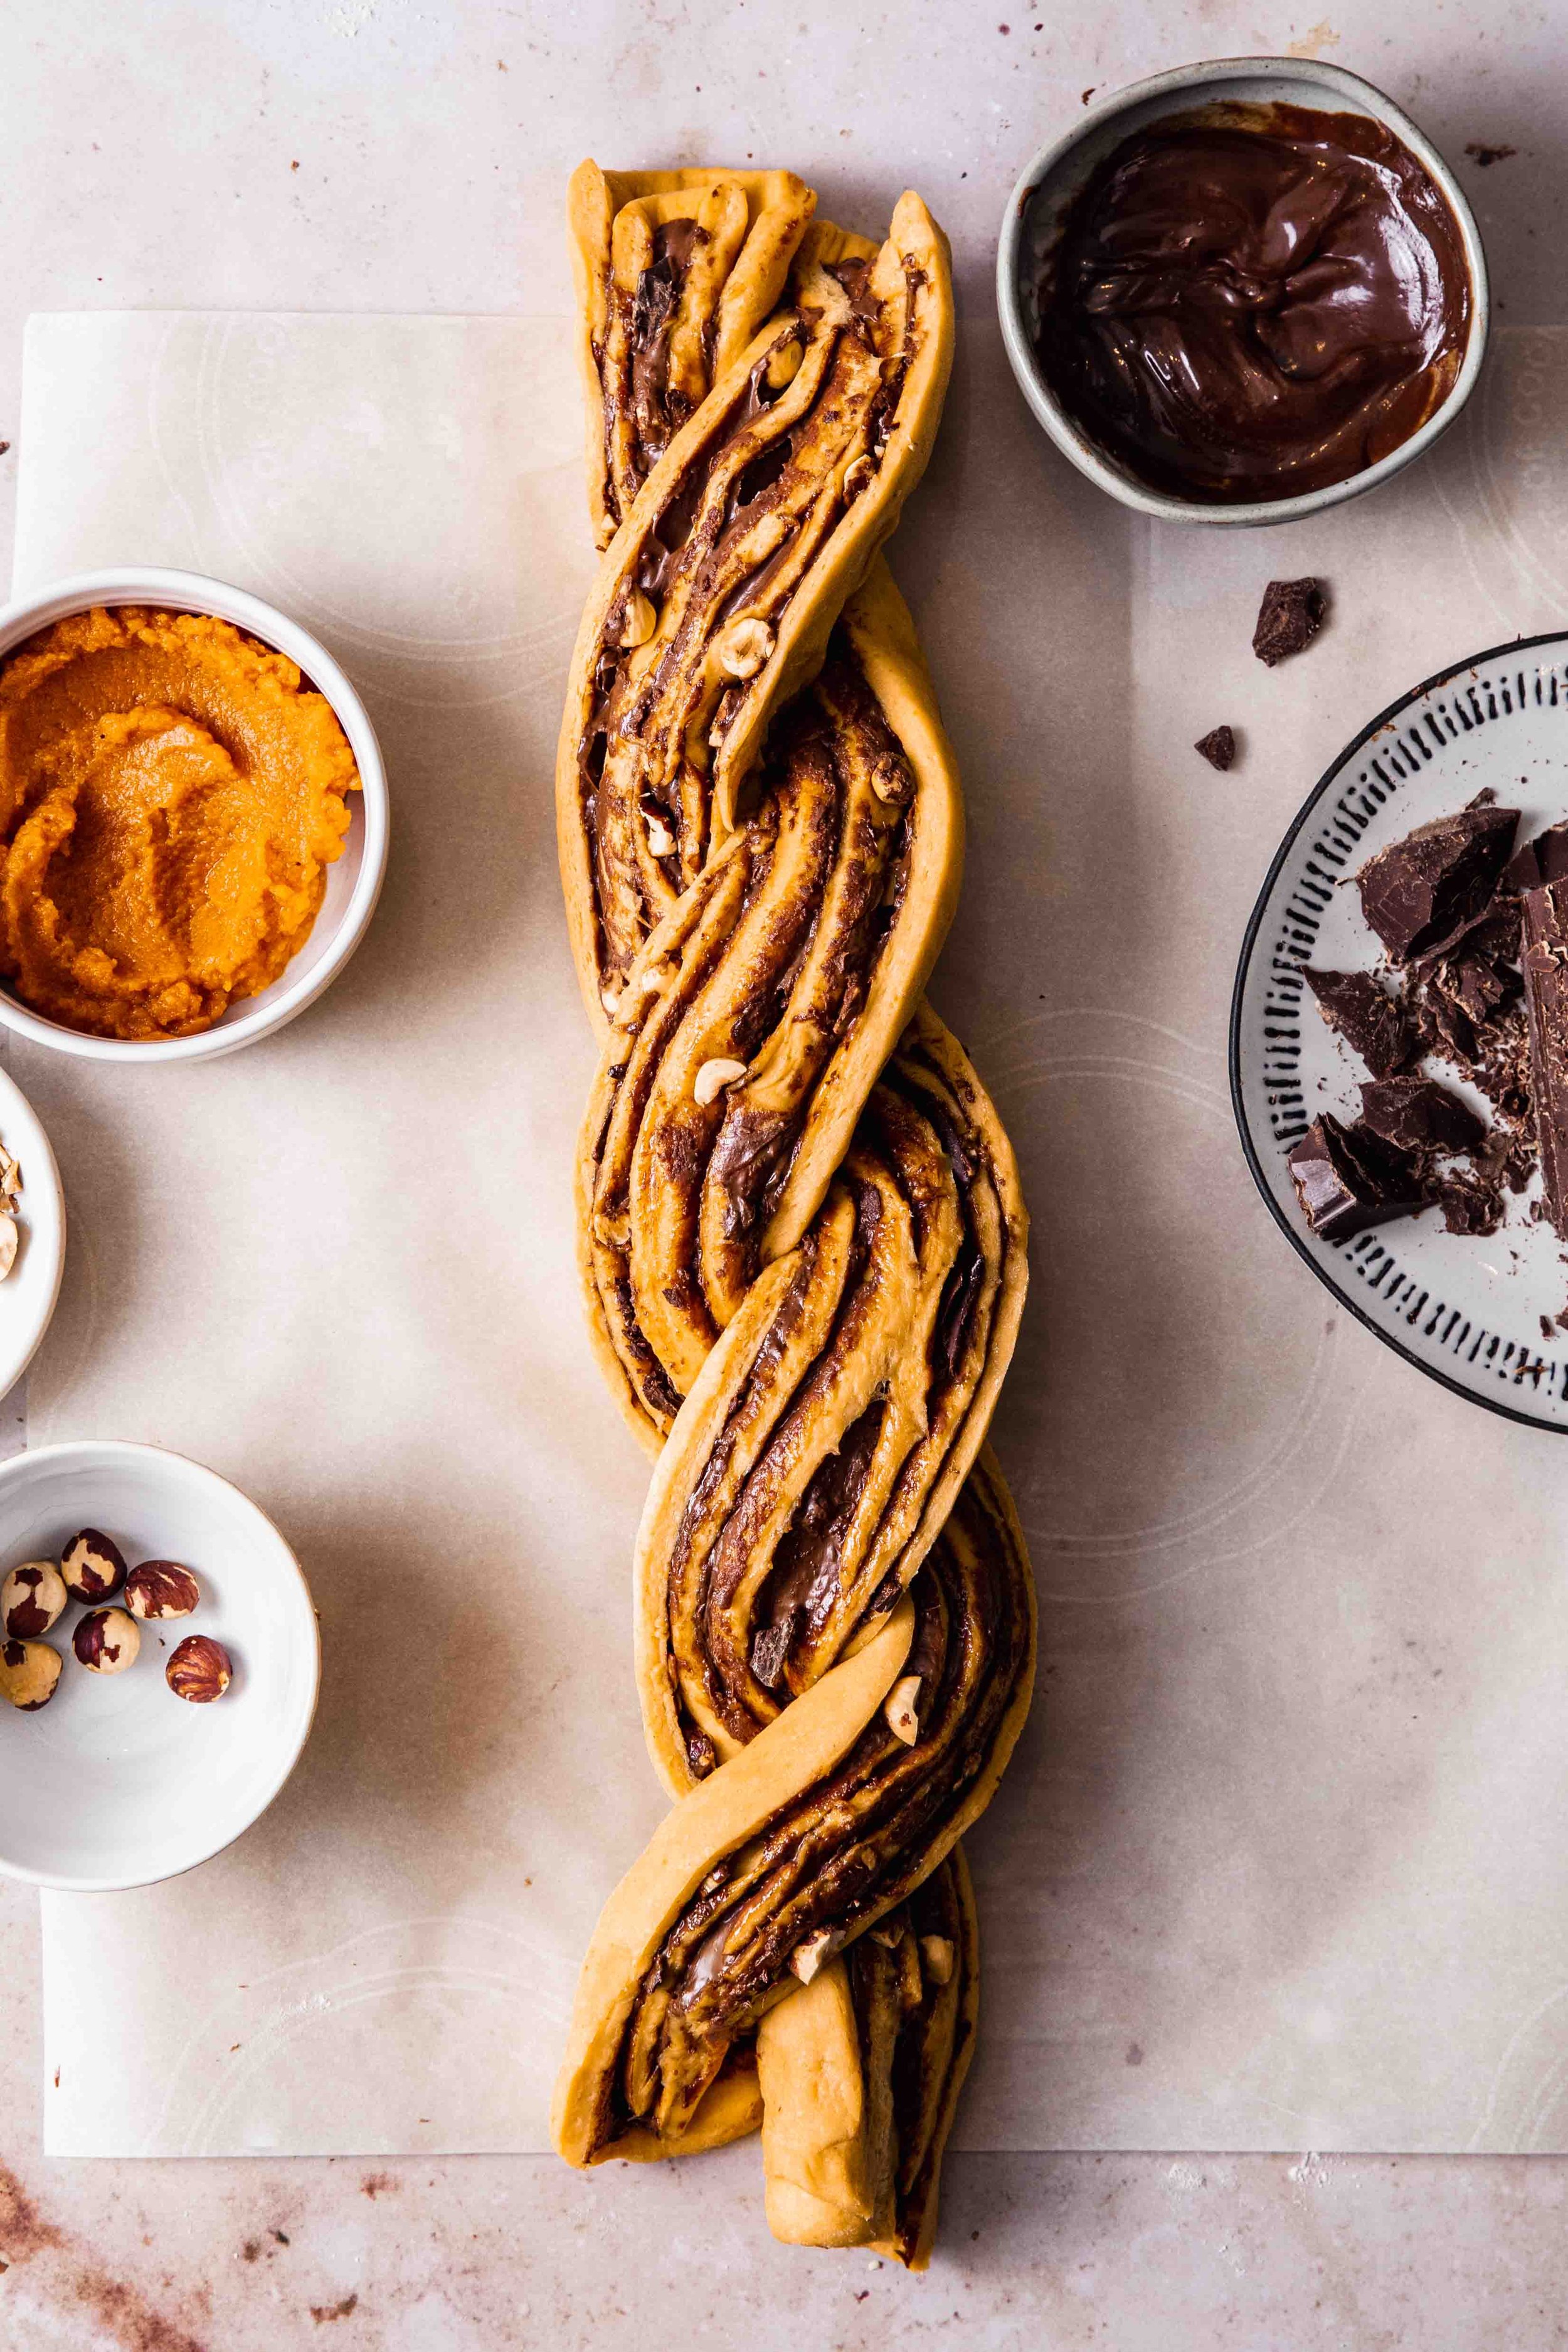 Pumpkin bake dough that is filled with chocolate spread and twisted into a braid